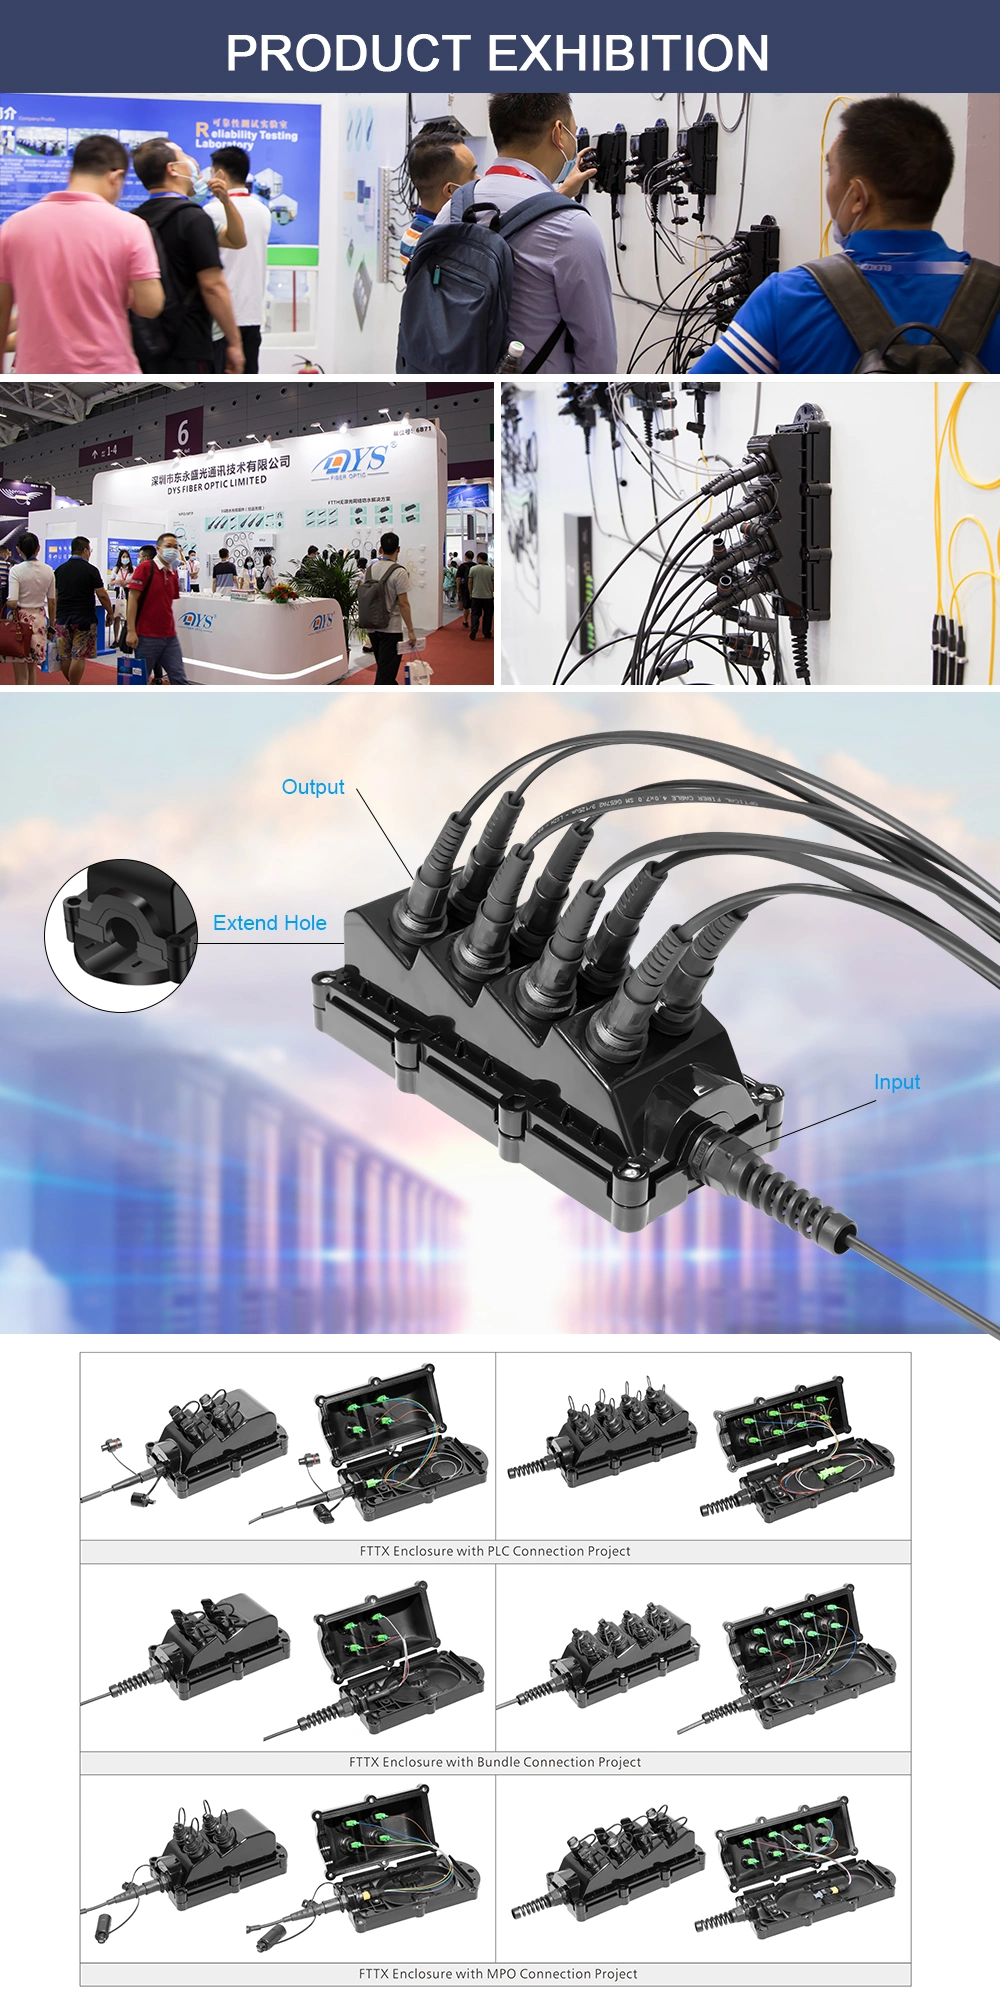 IP68 FTTX Enclosure Waterproof Fiber Optic Splice Closure Optical Cable Splice Joint Box with Sc Connection